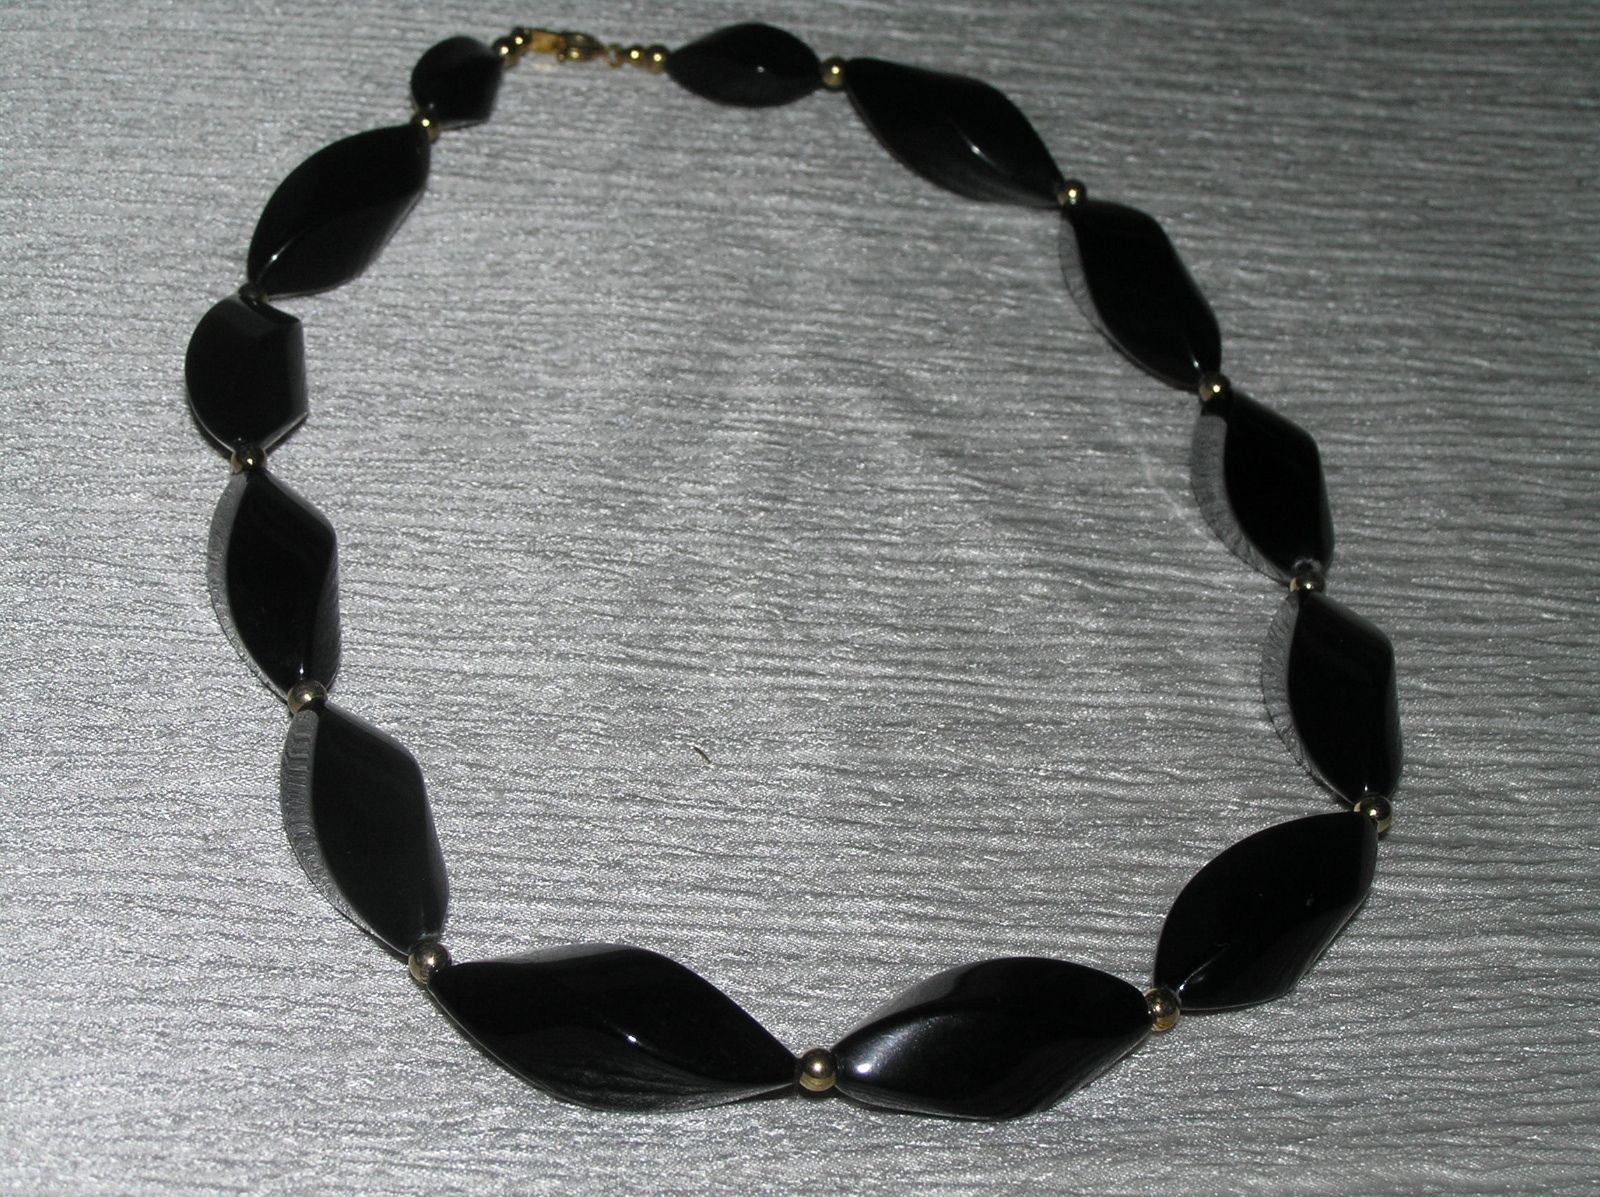 Estate Trifari Marked Black Plastic Twist with Goldtone Spacer Bead Necklace – - $8.59